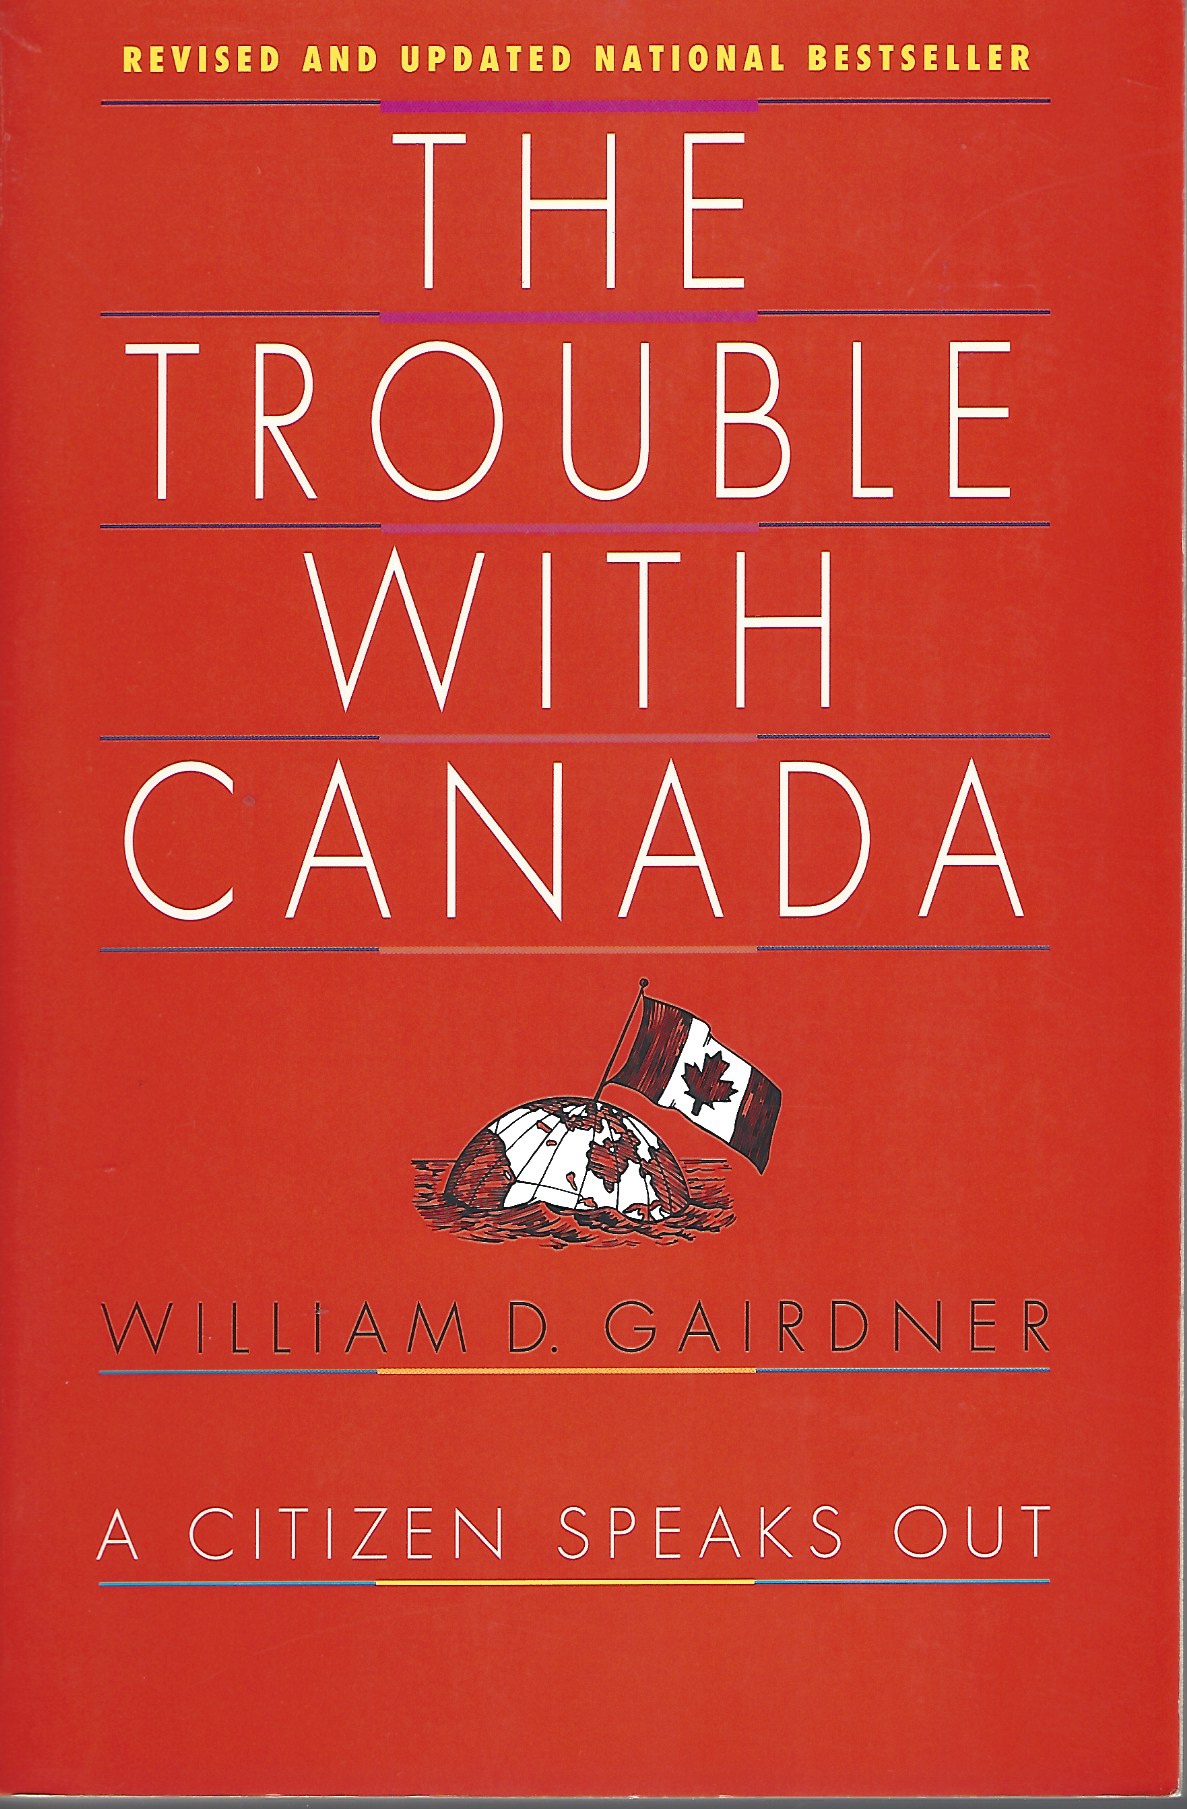 GAIRDRNER WILLIAM D. - Trouble with Canada: A Citizen Speaks out